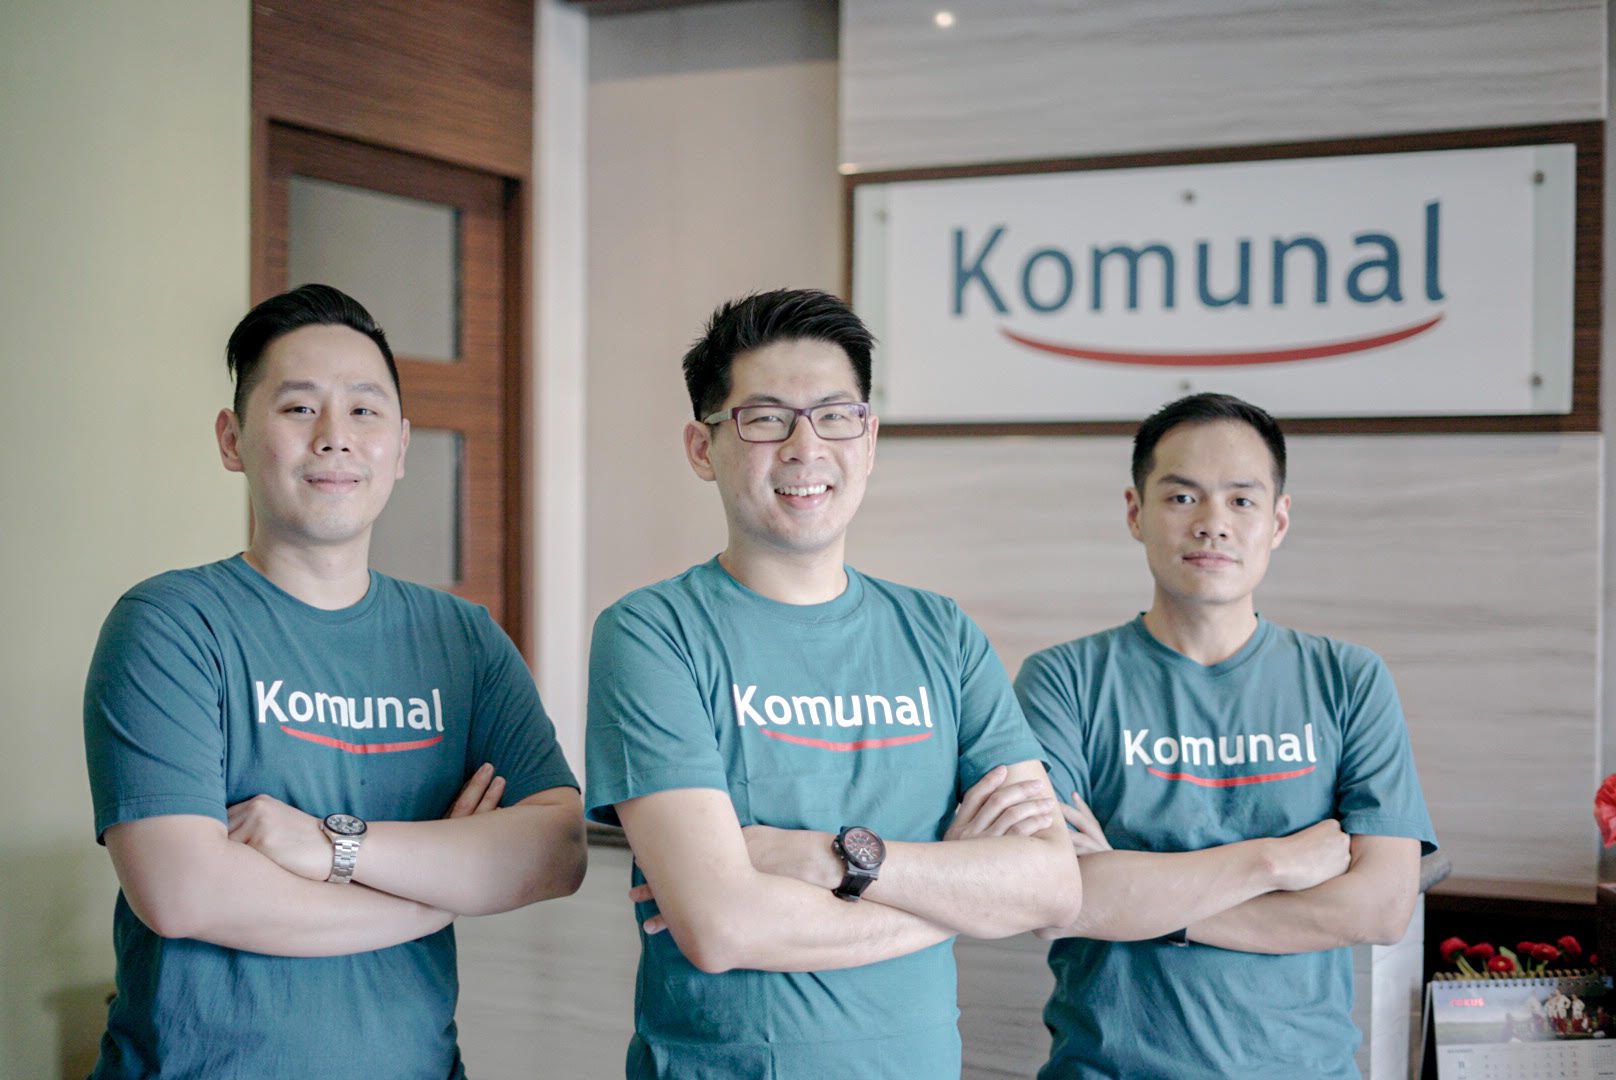 Asia Digest: Komunal bags seed funding; Jungle invests in BookMyShow SEA